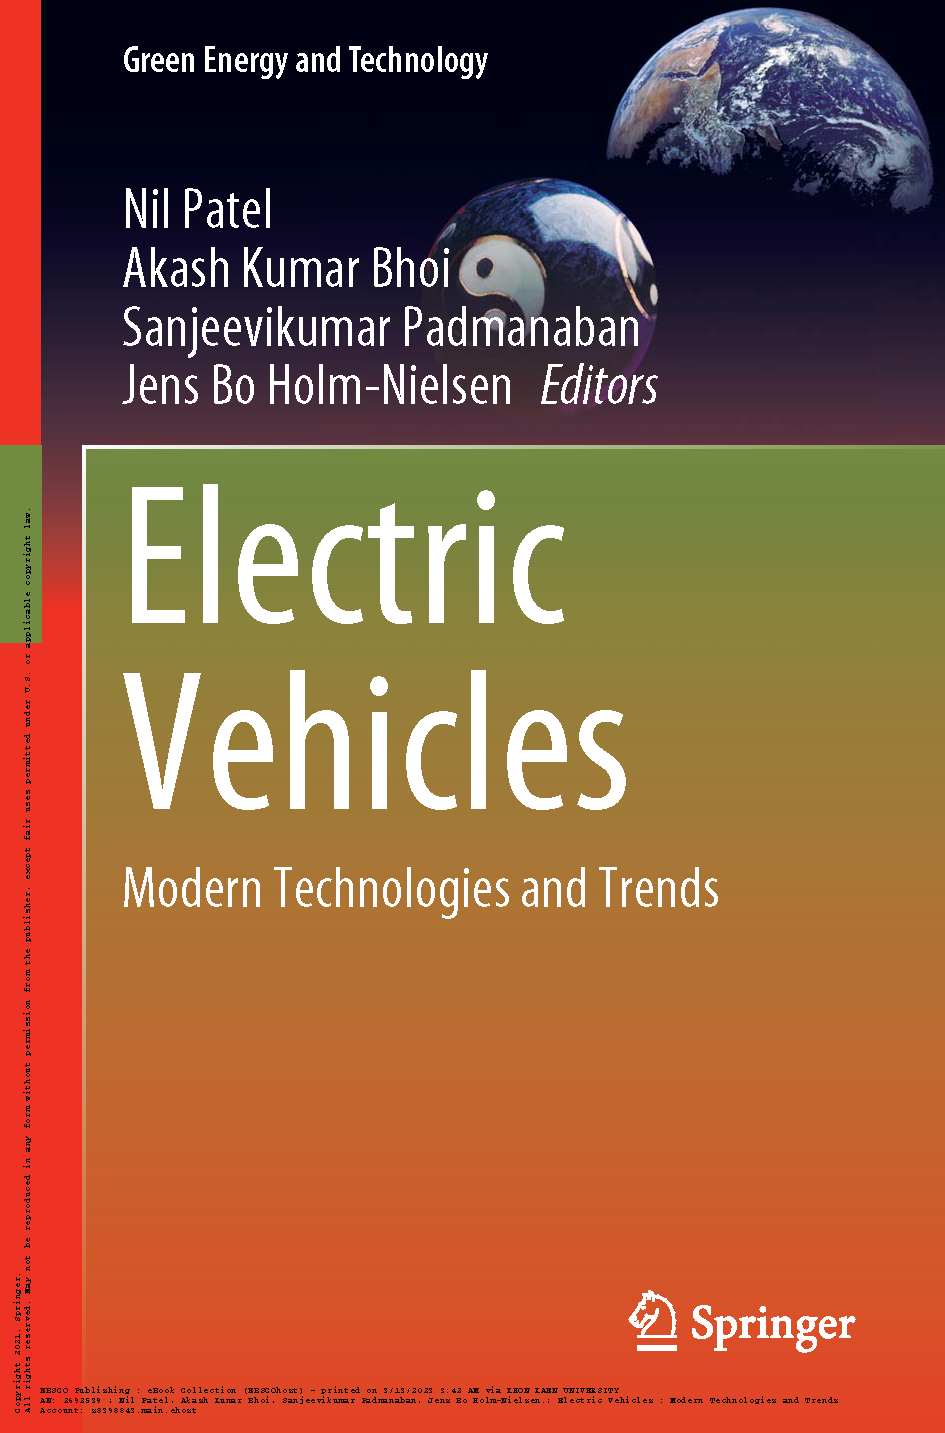 Electric Vehicles Modern Technologies and Trends